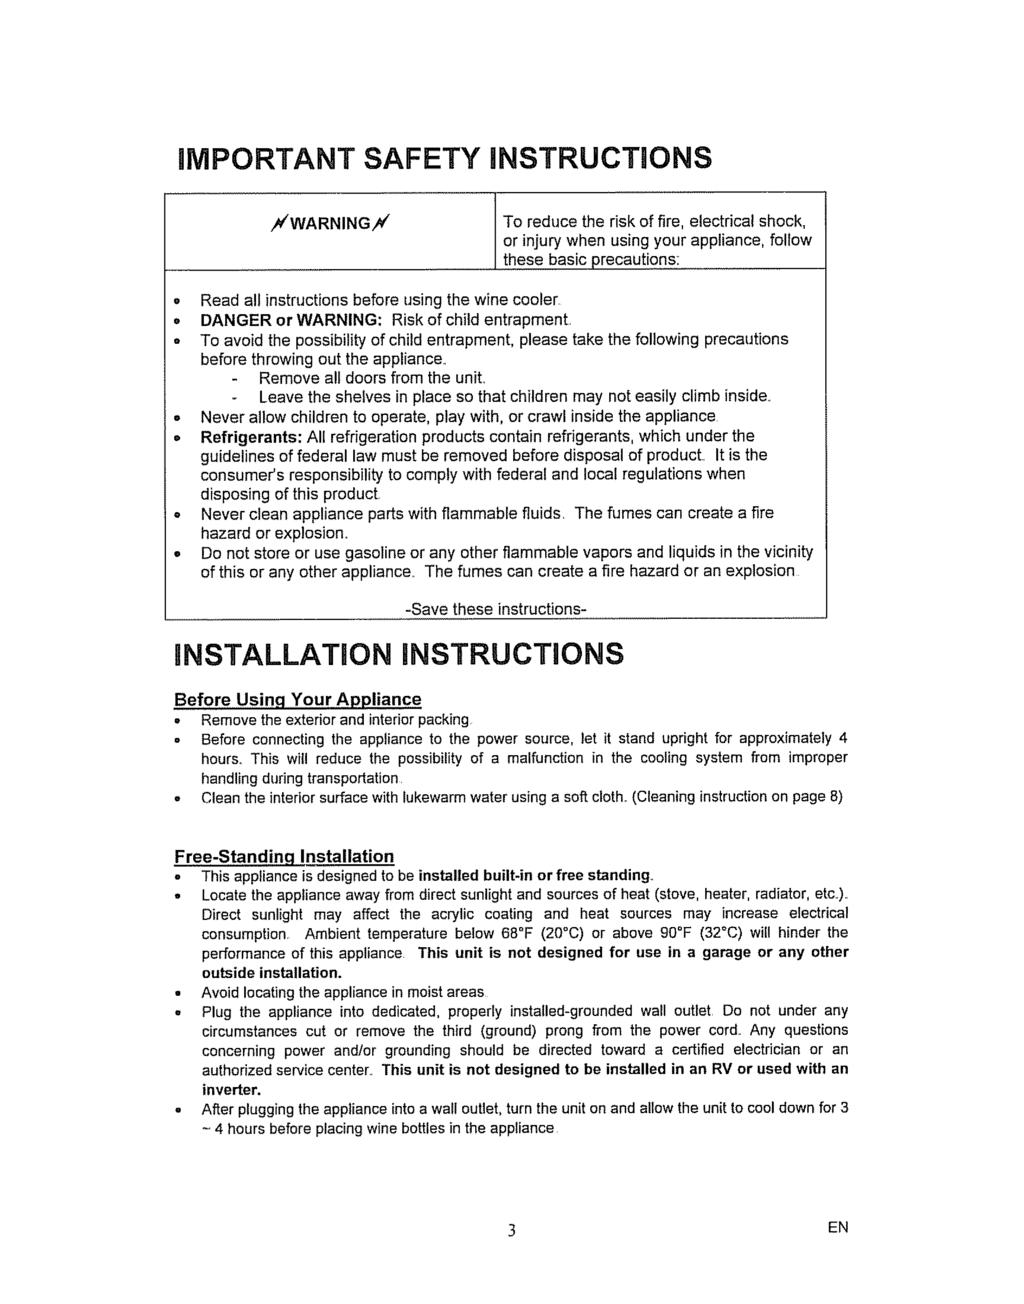 important SAFETY instructions _f'warning/v To reduce the risk of fire, electrical shock, or injury when using your appliance, follow these basic precautions: Read all instructions before using the